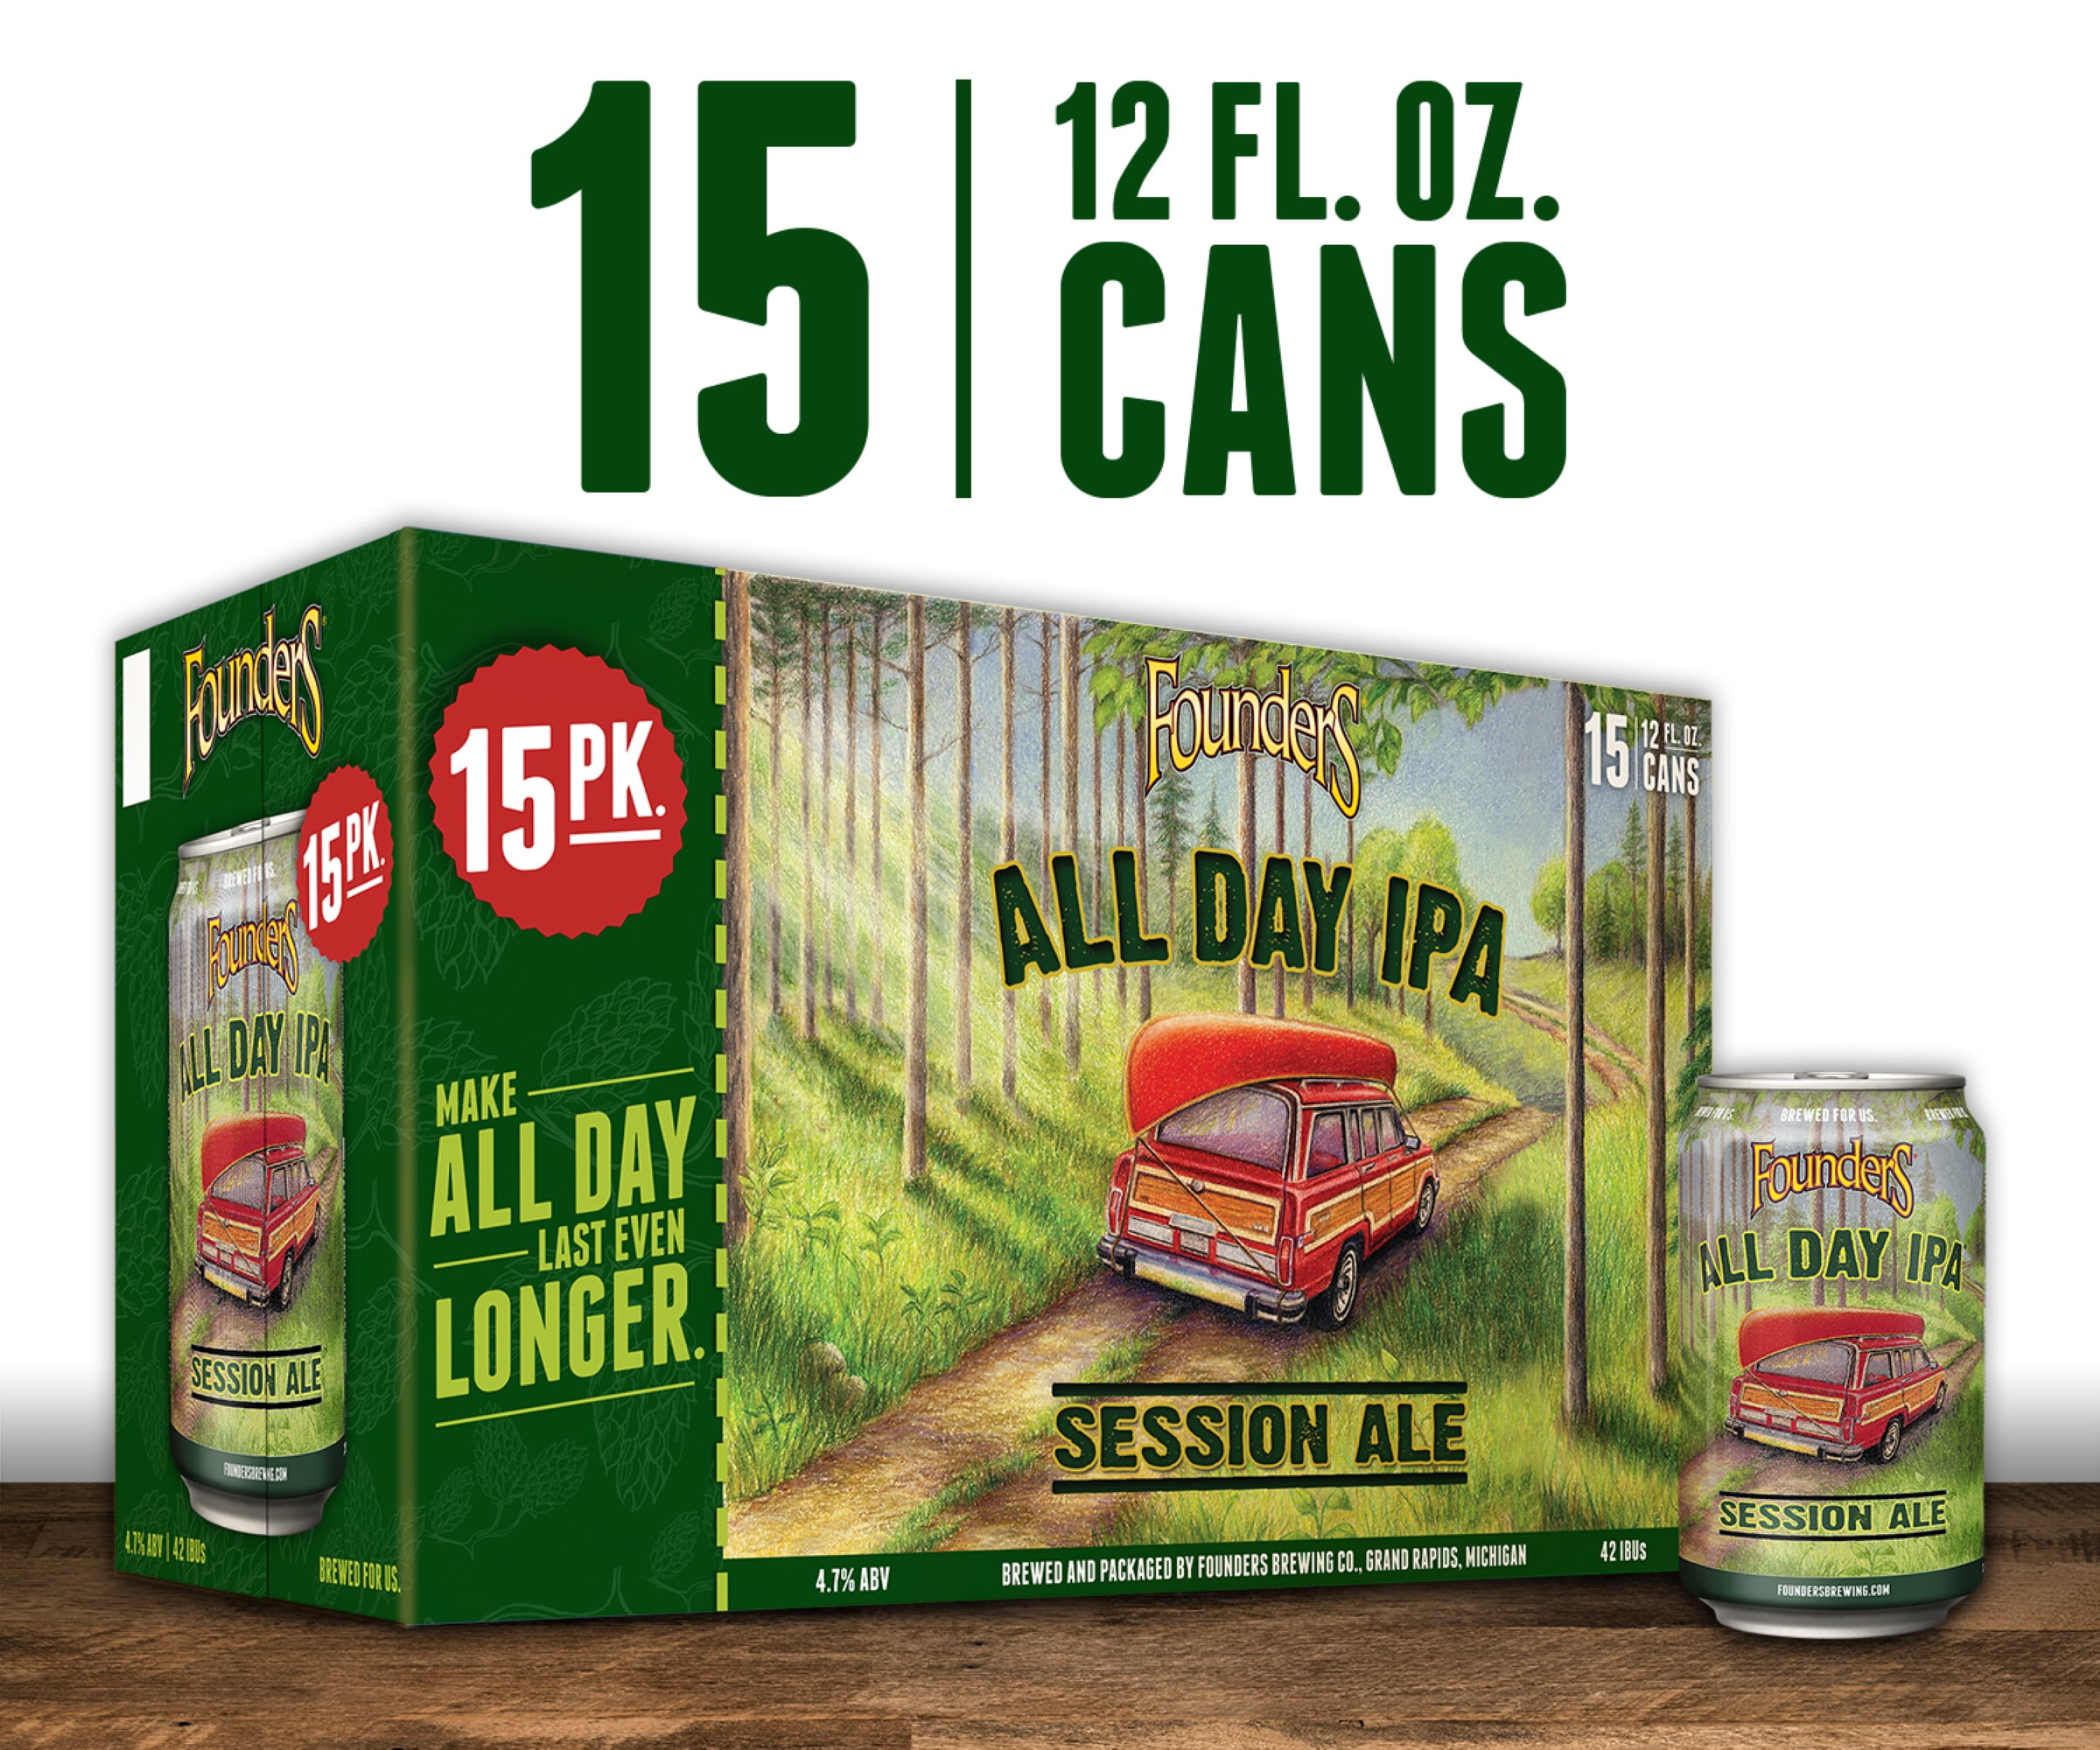 founders-all-day-ipa-session-ale-15-pack-12-fl-oz-cans-walmart